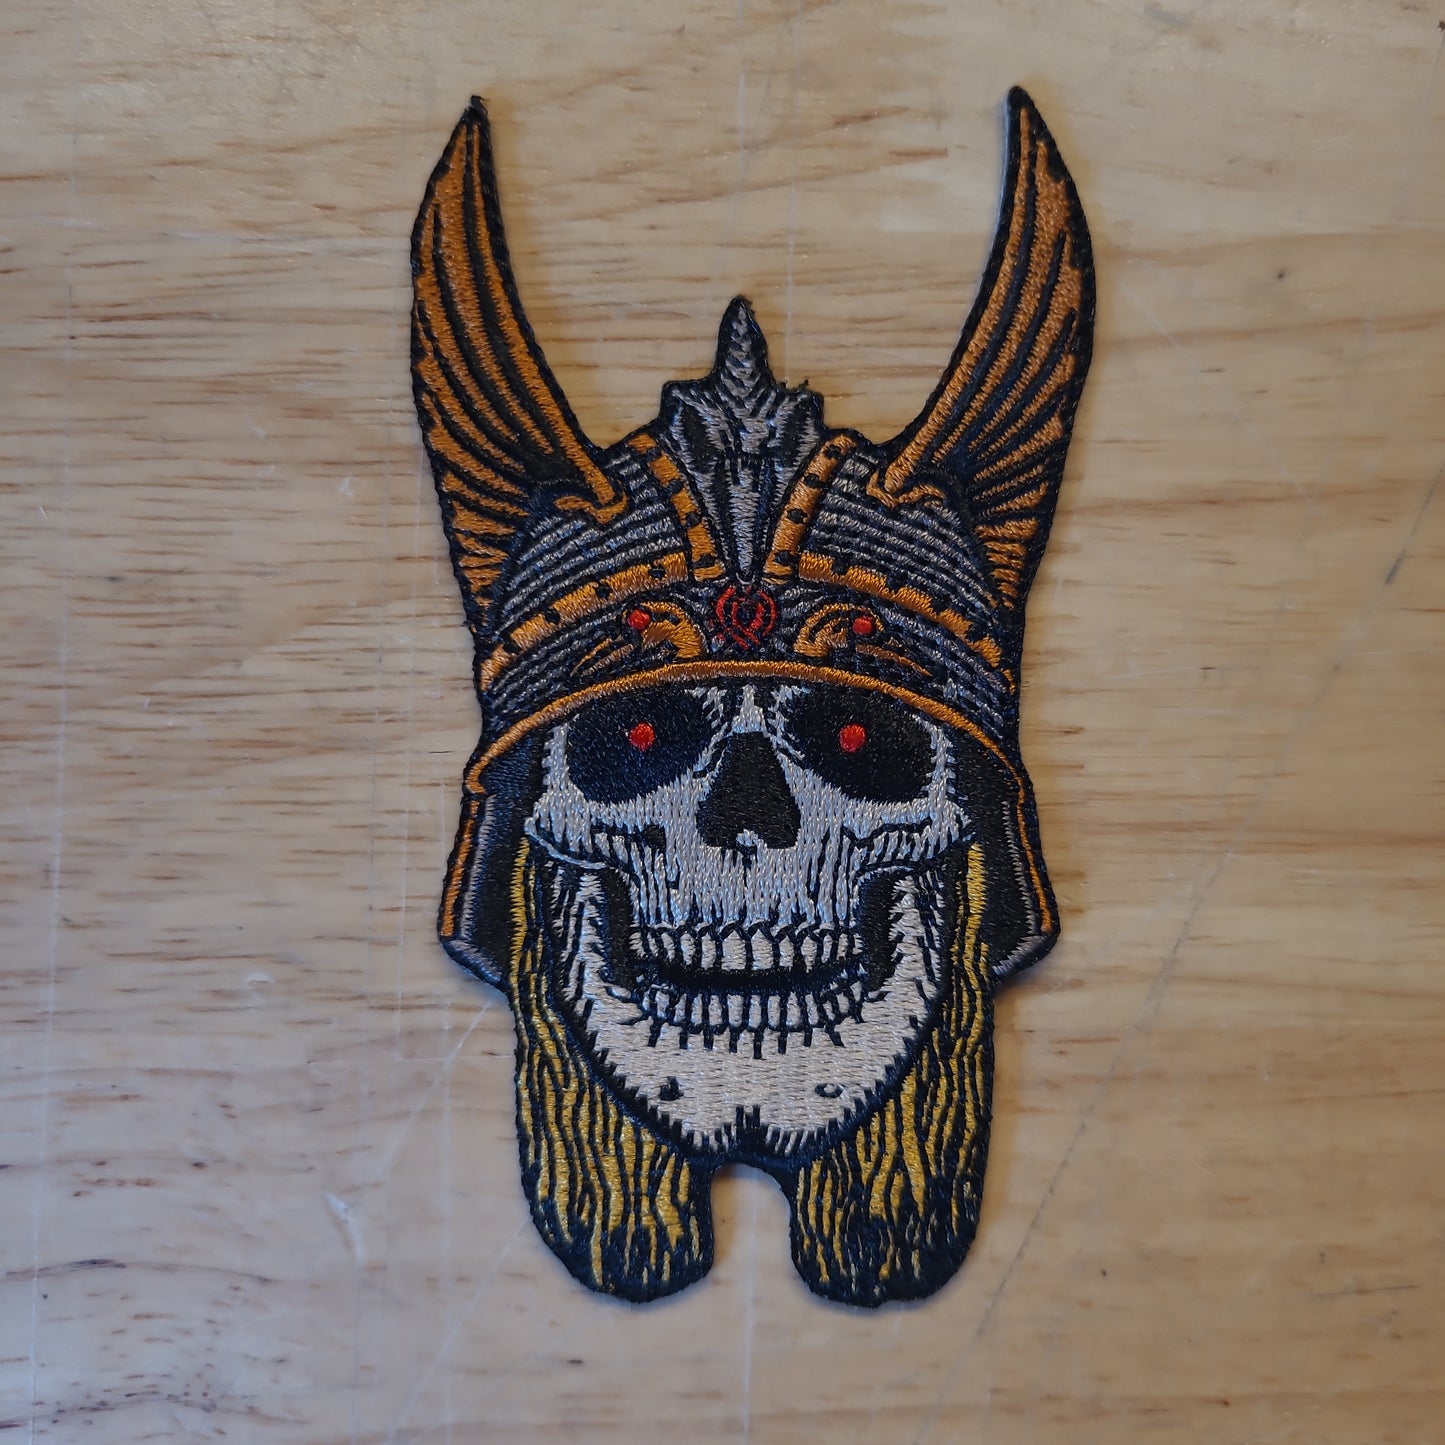 Powell & Peralta Patches - Andy Anderson Skull